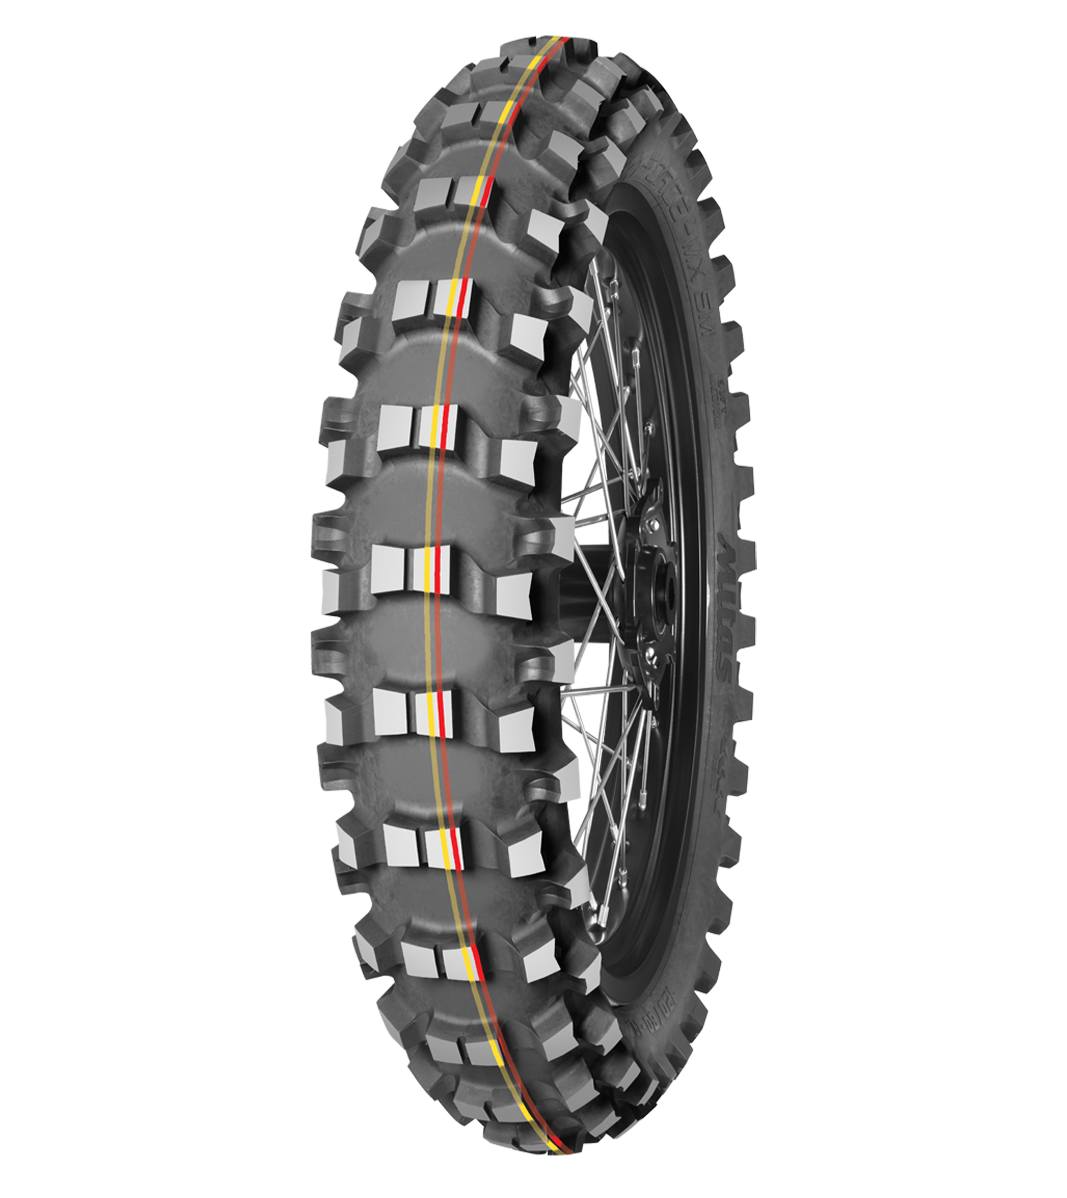 Mitas TERRA FORCE-MX SM 90/100-14 Motocross Competition Off-Road SOFT TO MEDIUM 49M Red &amp; Yellow Tube Rear Tire, 226032, 90/100-14, Motocross, Motocross Competition, Off-Road, Rear, Terra Force, Terra Force-MX SM, Trail, Tires - Imported and distributed in North &amp; South America by Lindeco Genuine Powersports - Premier Powersports Equipment and Accessories for Motorcycle Enthusiasts, Professional Riders and Dealers.